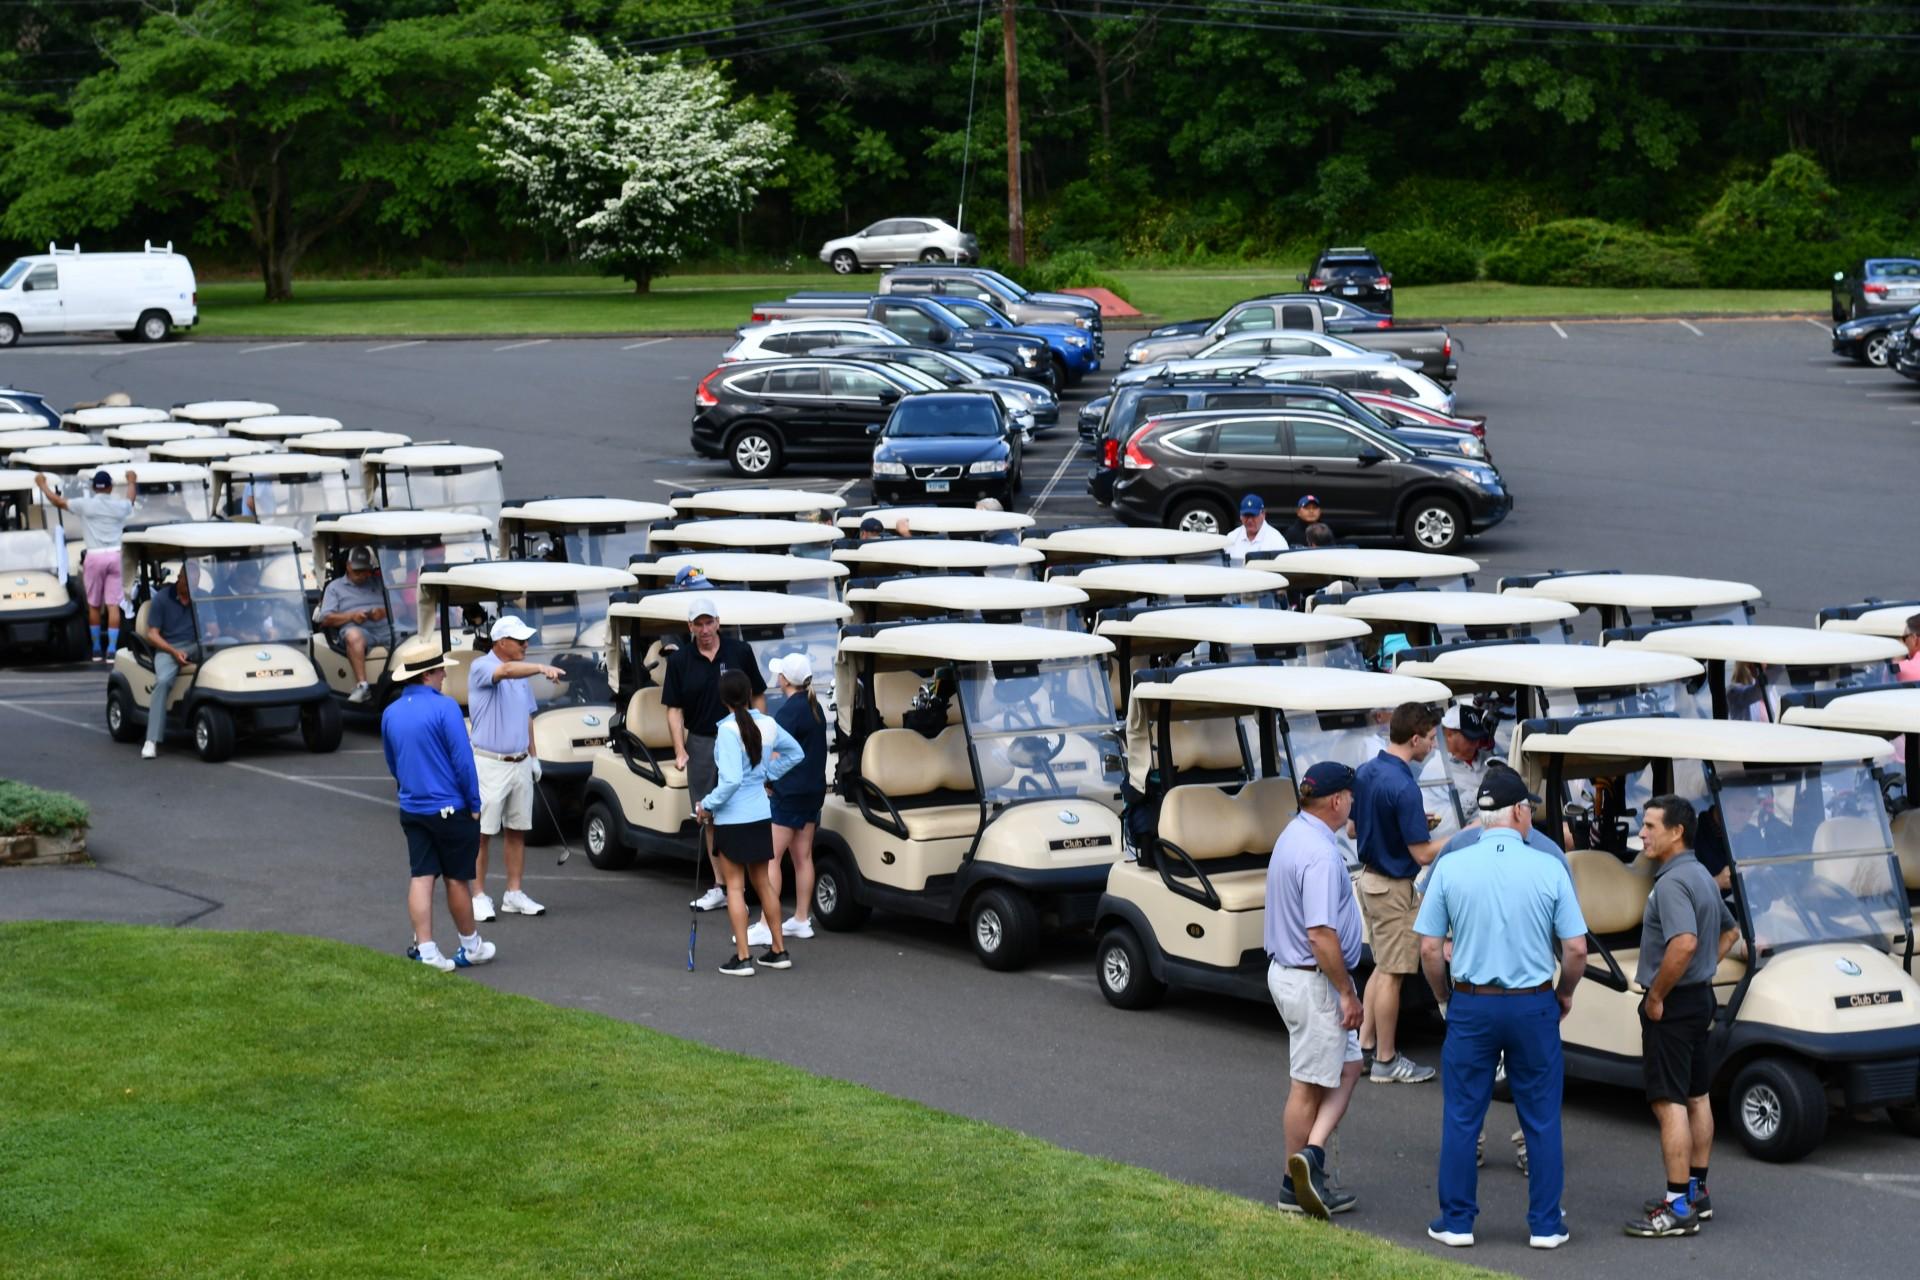 Golf carts lined up ready to be used